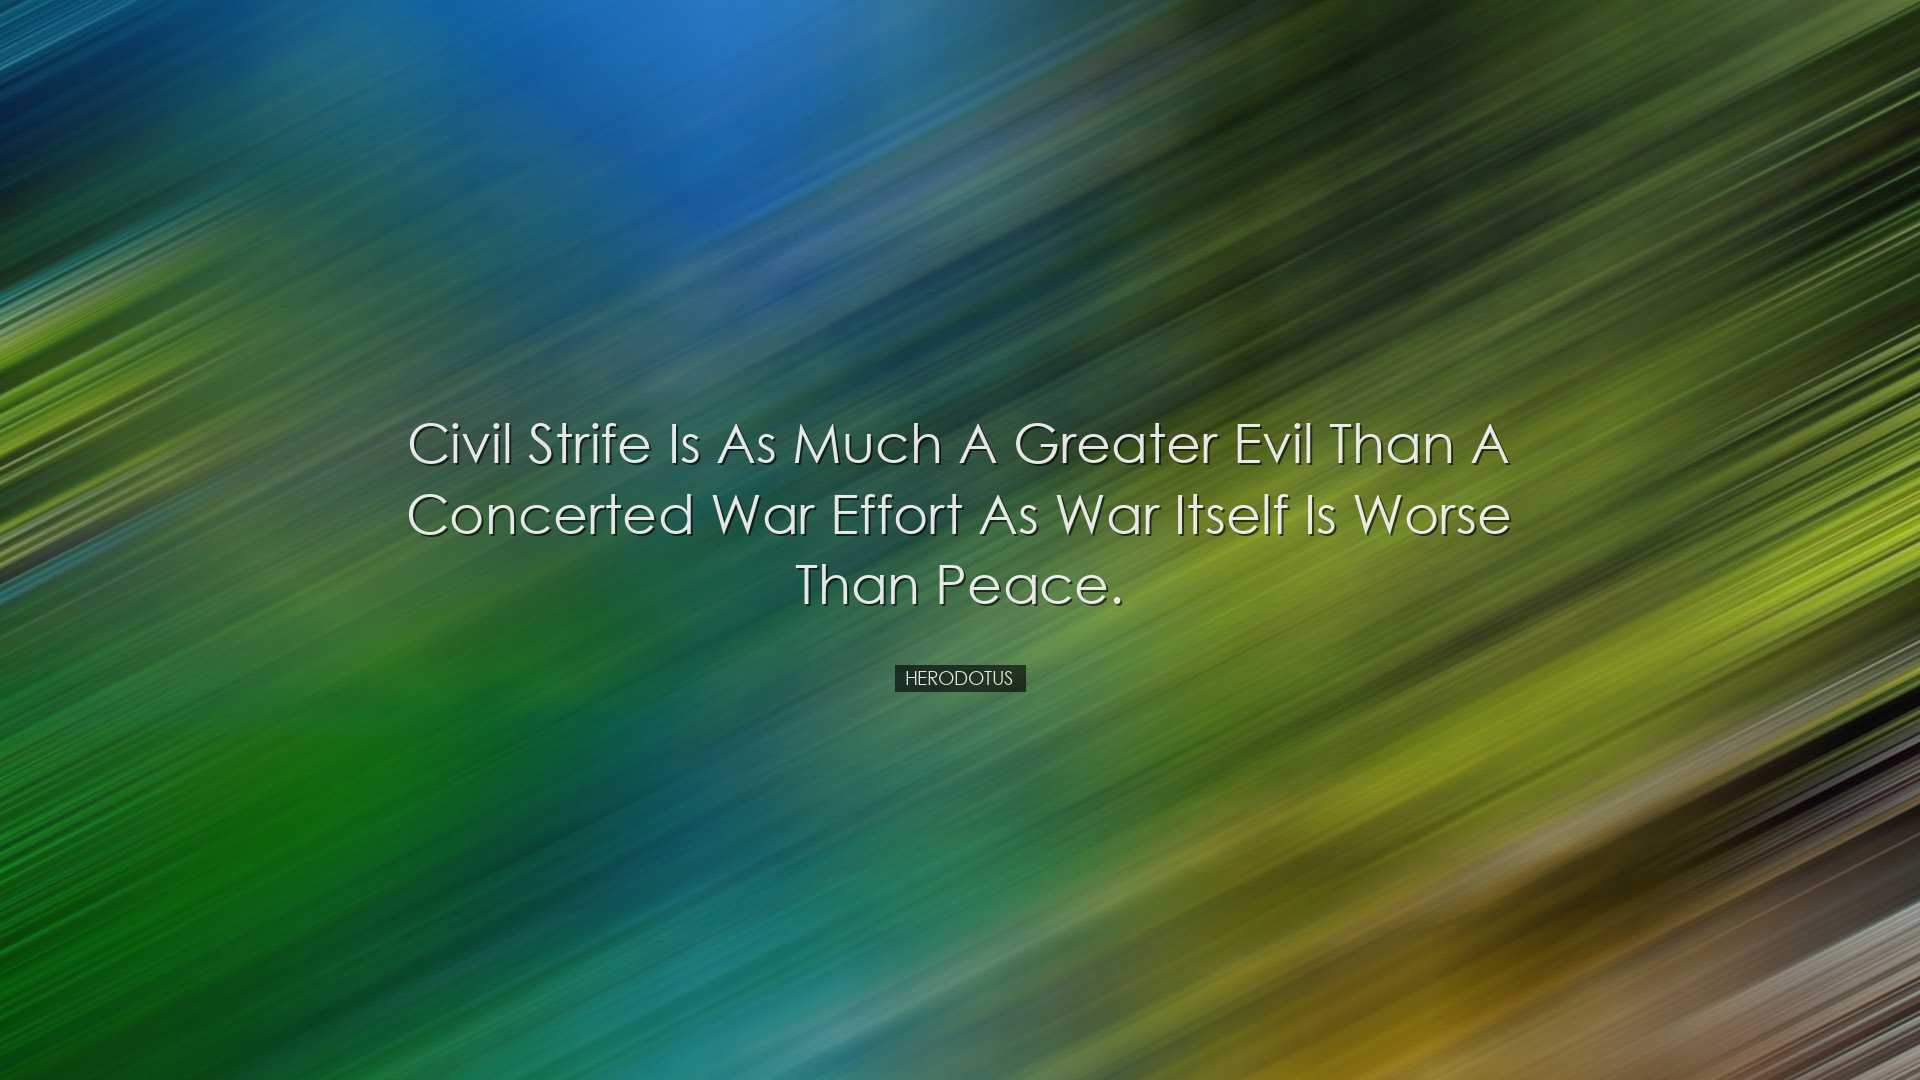 Civil strife is as much a greater evil than a concerted war effort